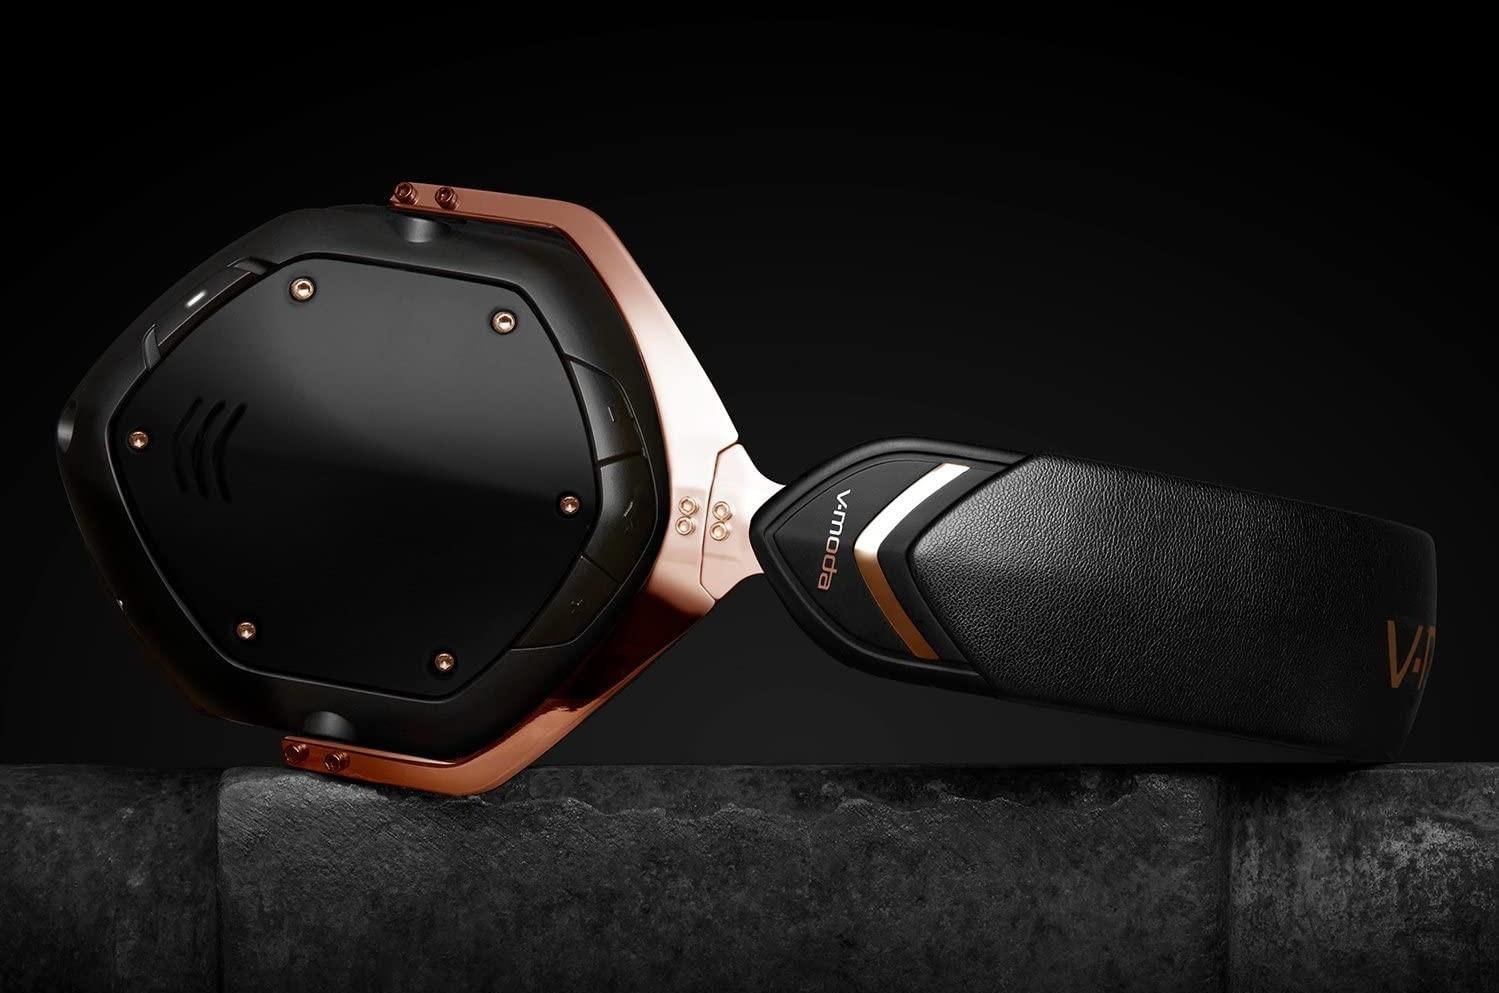 Save up to 62 percent on V-MODA’s Wireless Headphones and accessories